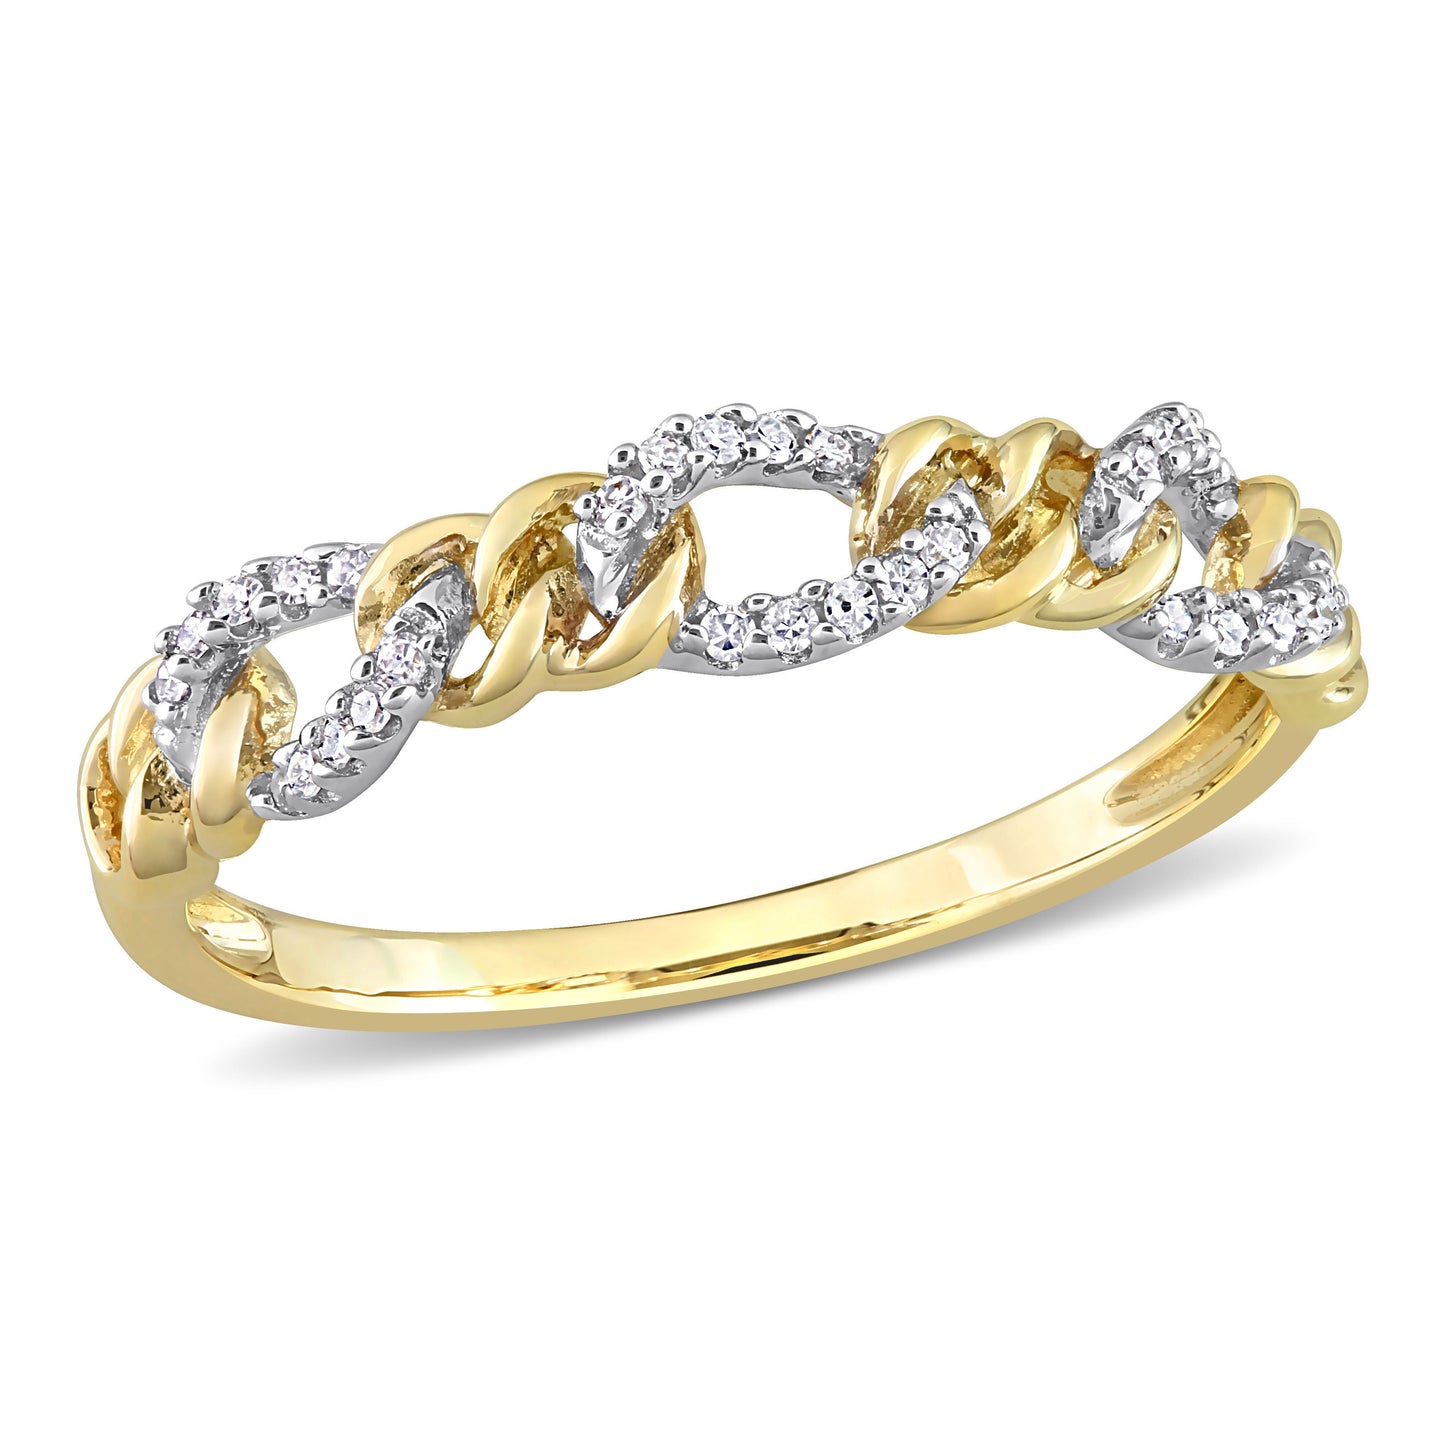 Two-Tone Oval Link Diamond Ring in 14k Gold